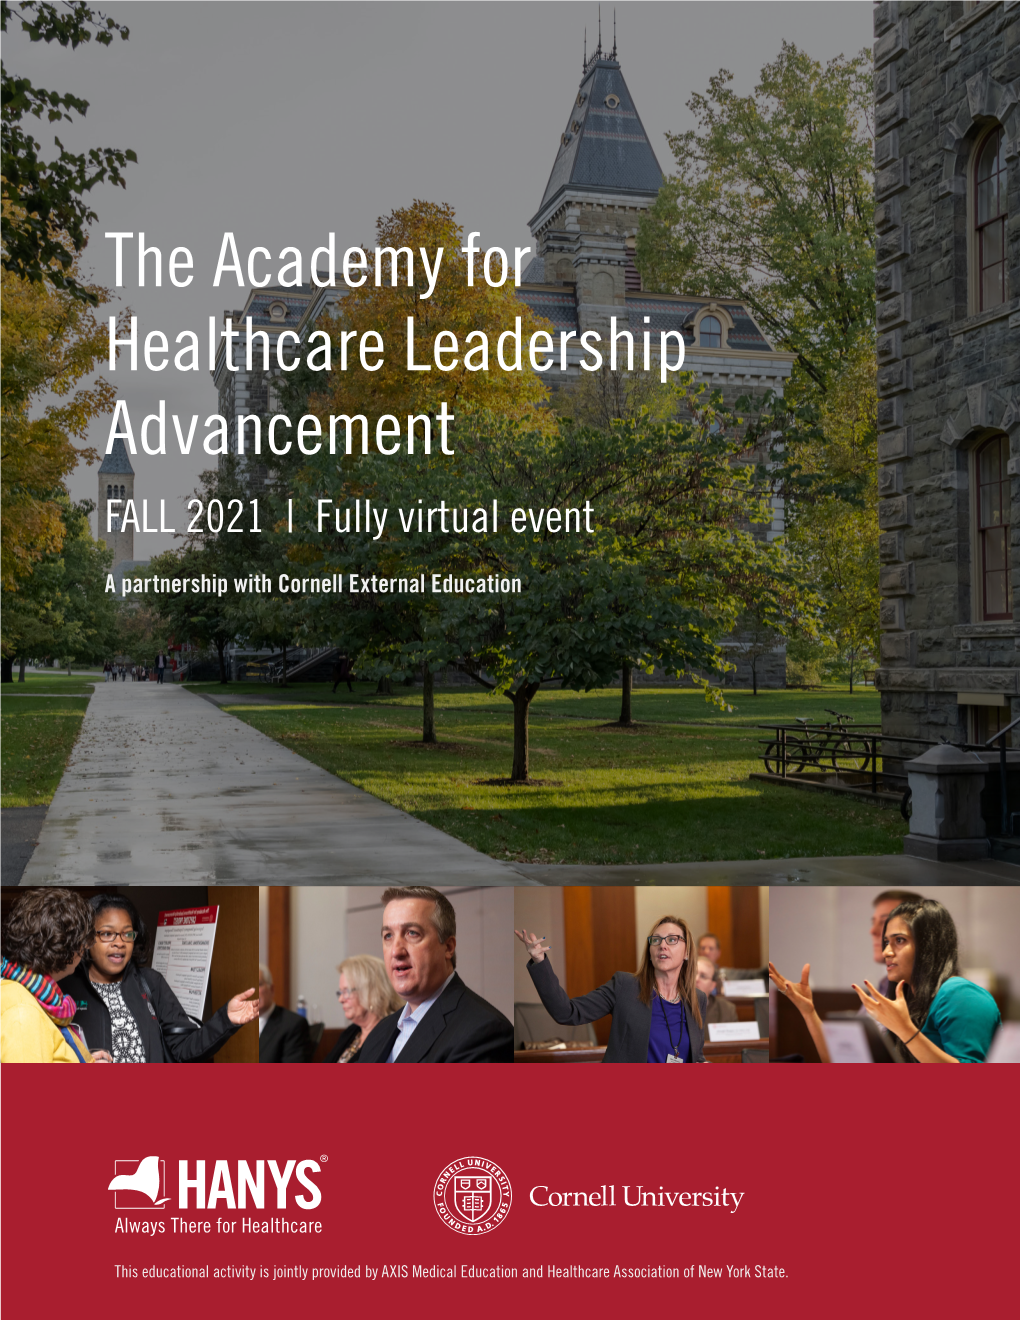 The Academy for Healthcare Leadership Advancement FALL 2021 | Fully Virtual Event